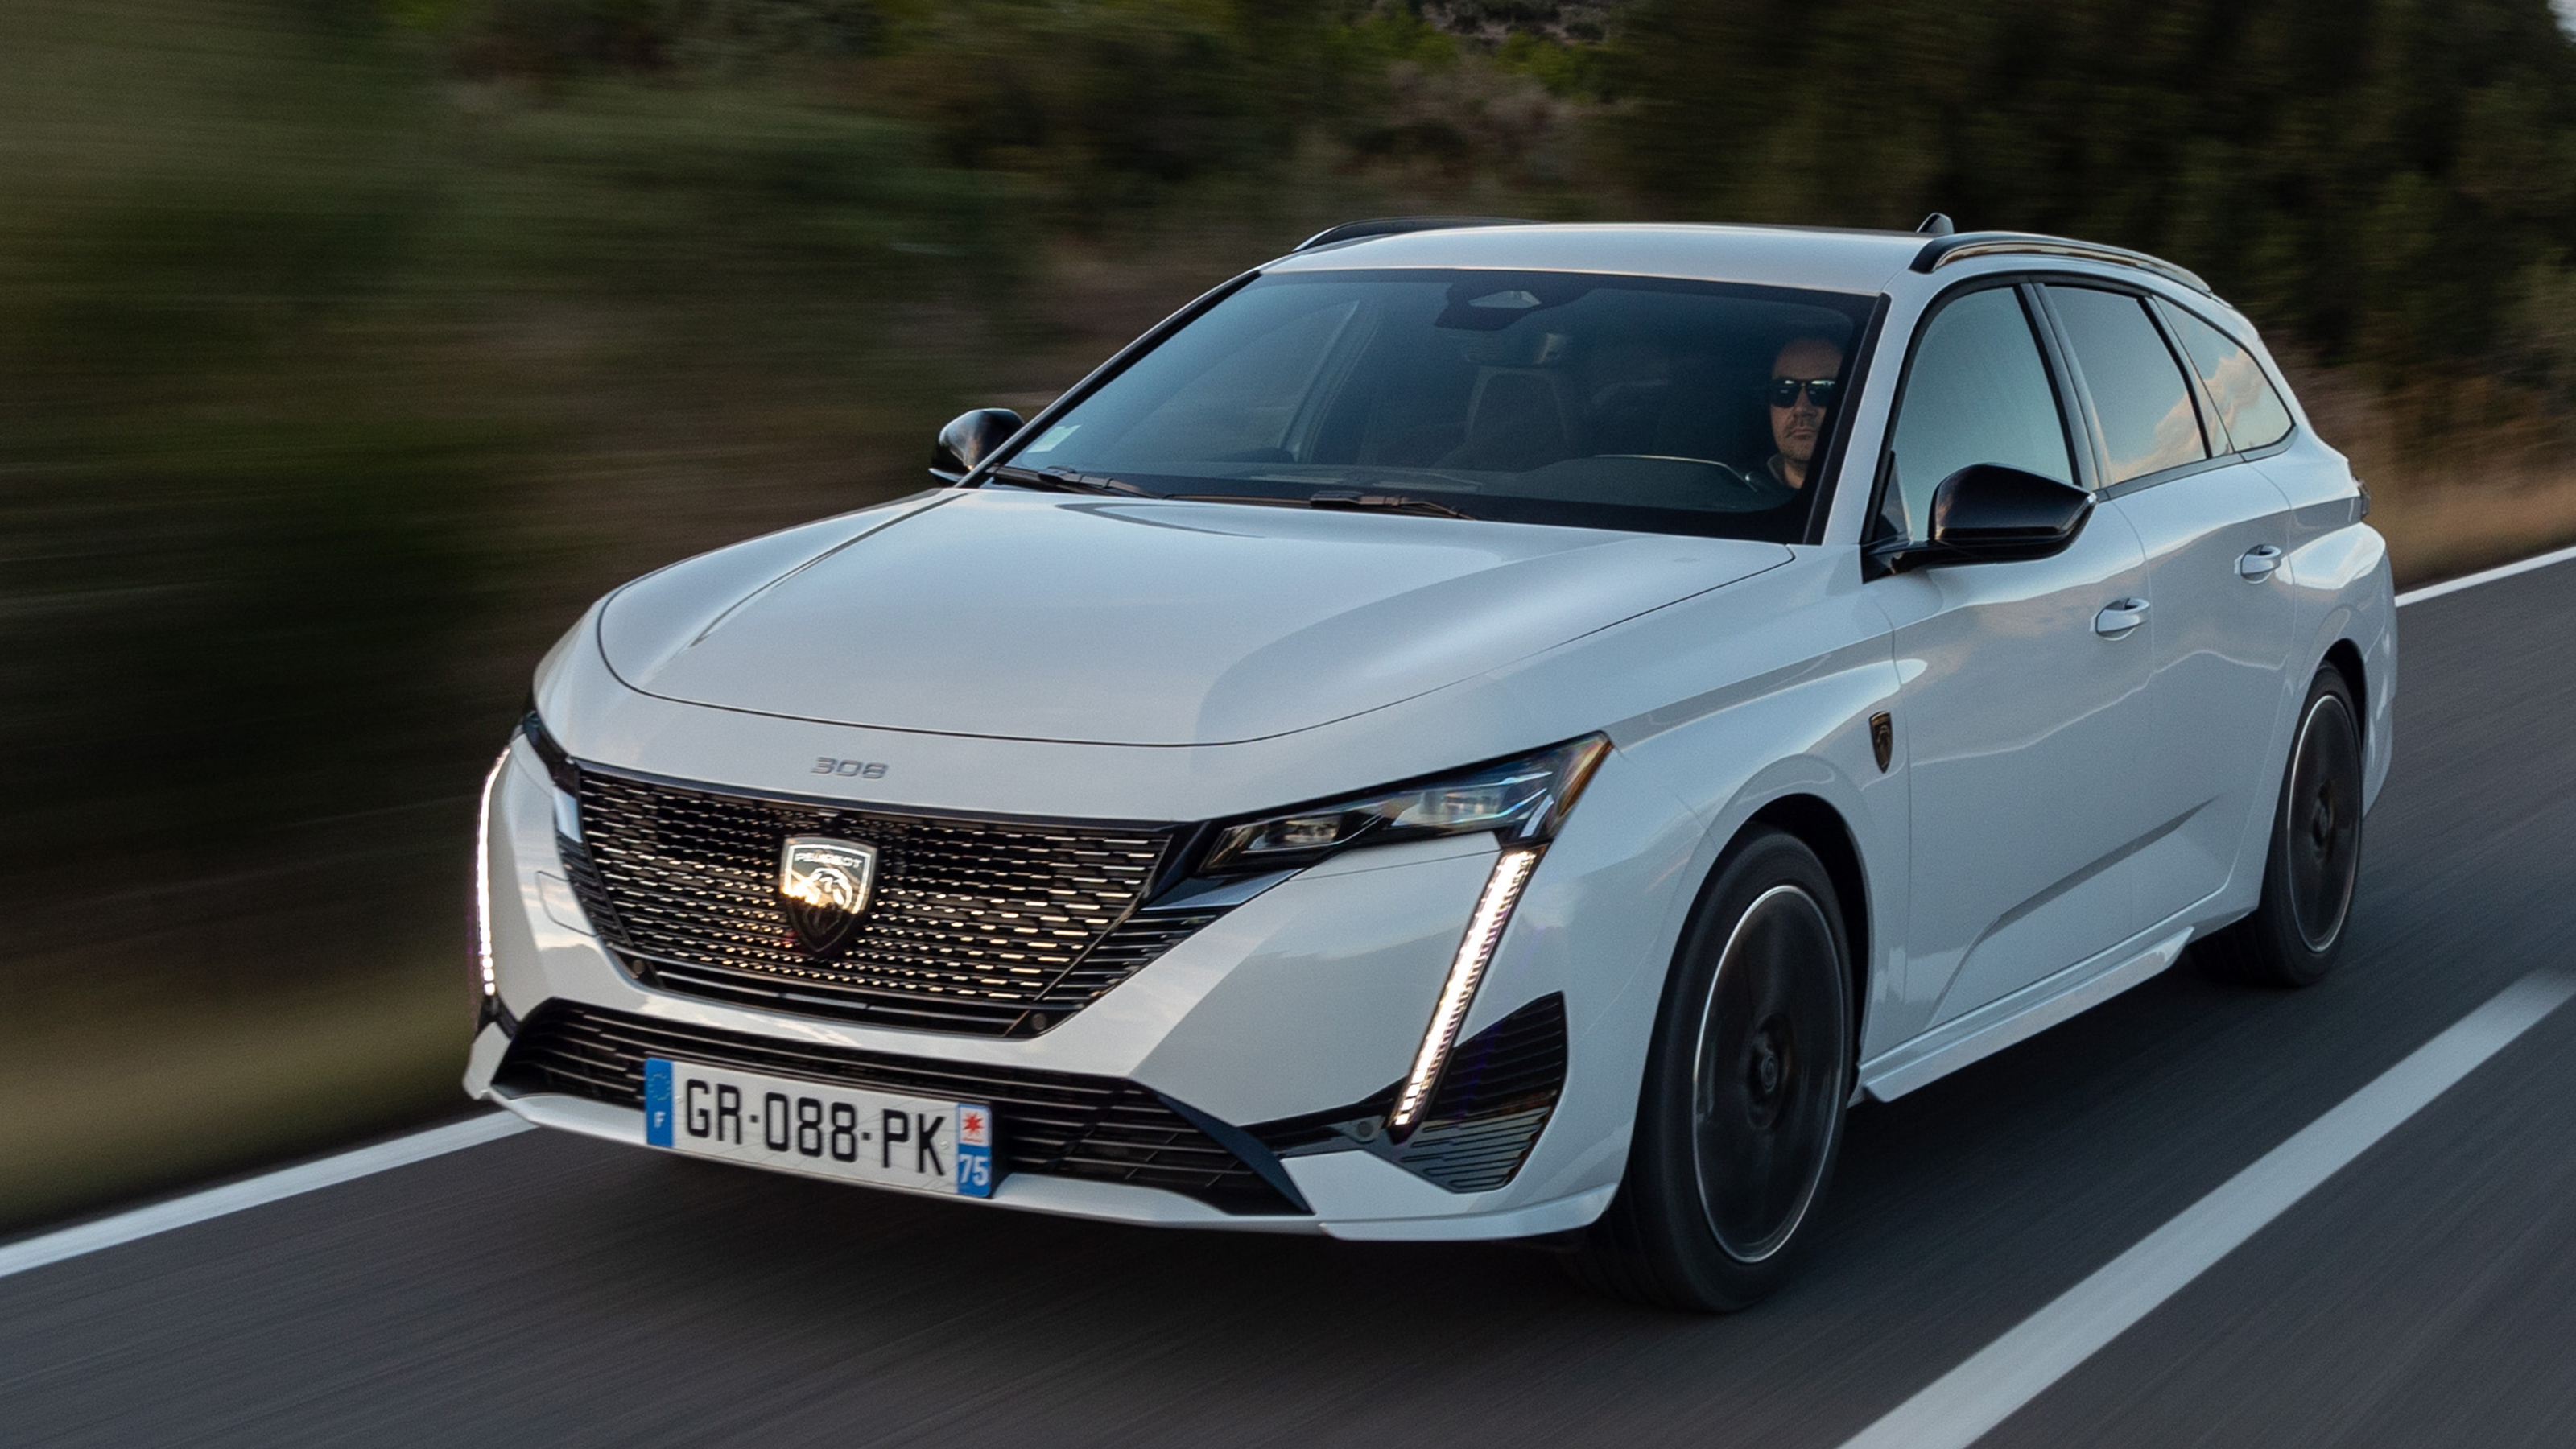 Peugeot e-308 To Offer 250 Miles Of Range, Due In 2023